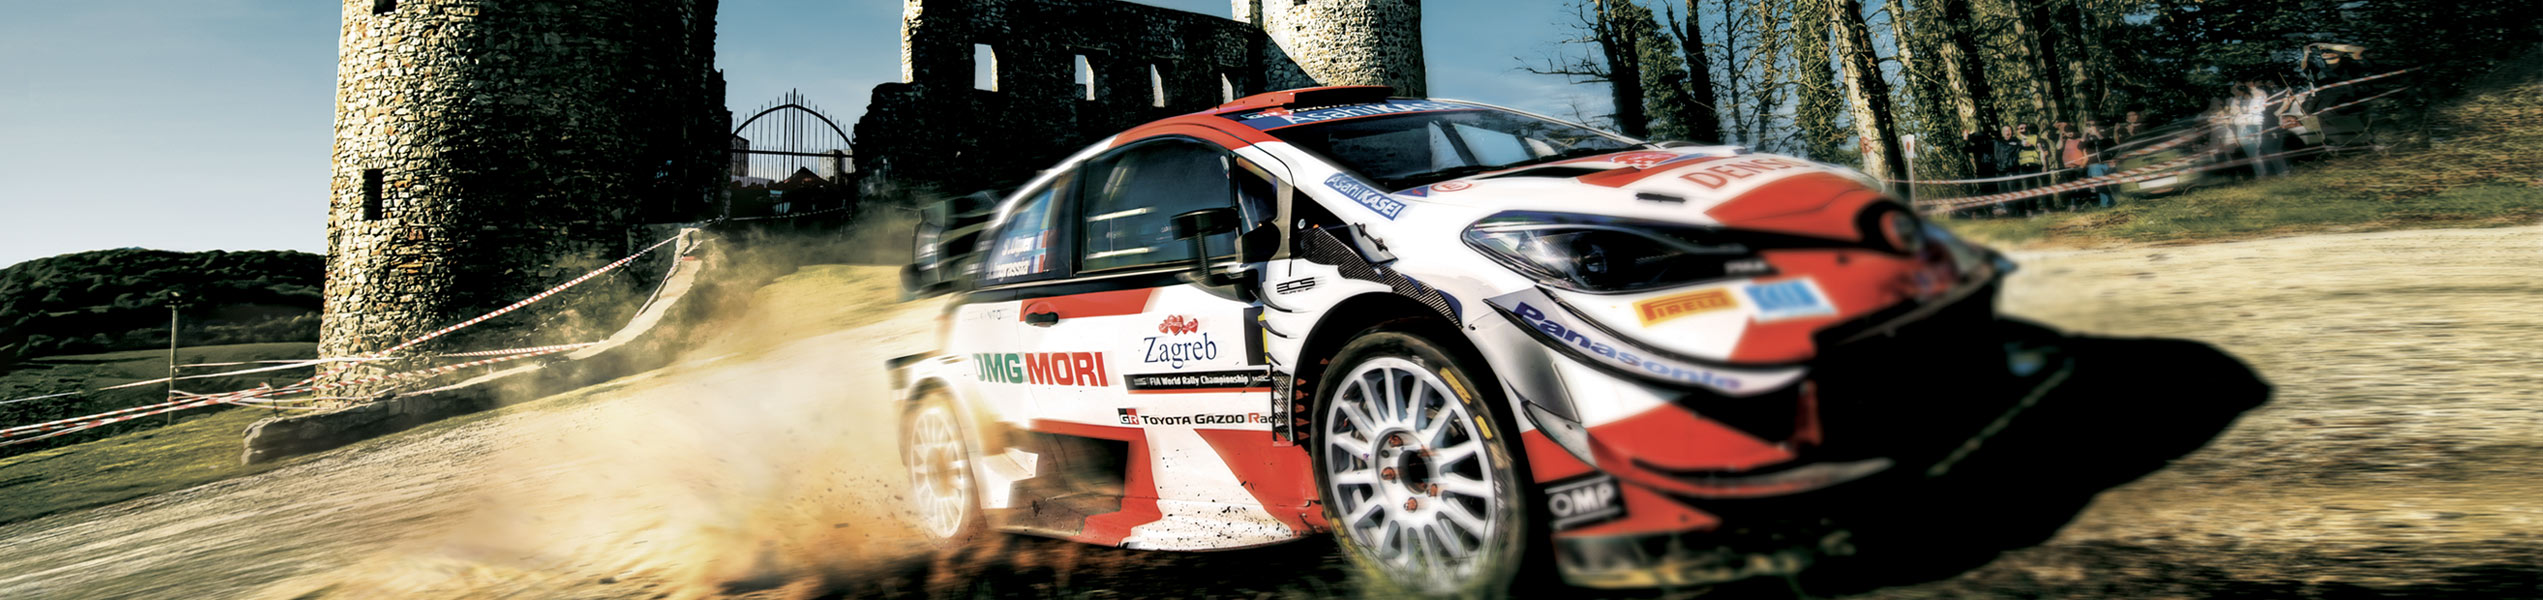 WRC Croatia Rally – Early Bird tickets at discounted rates on sale now!